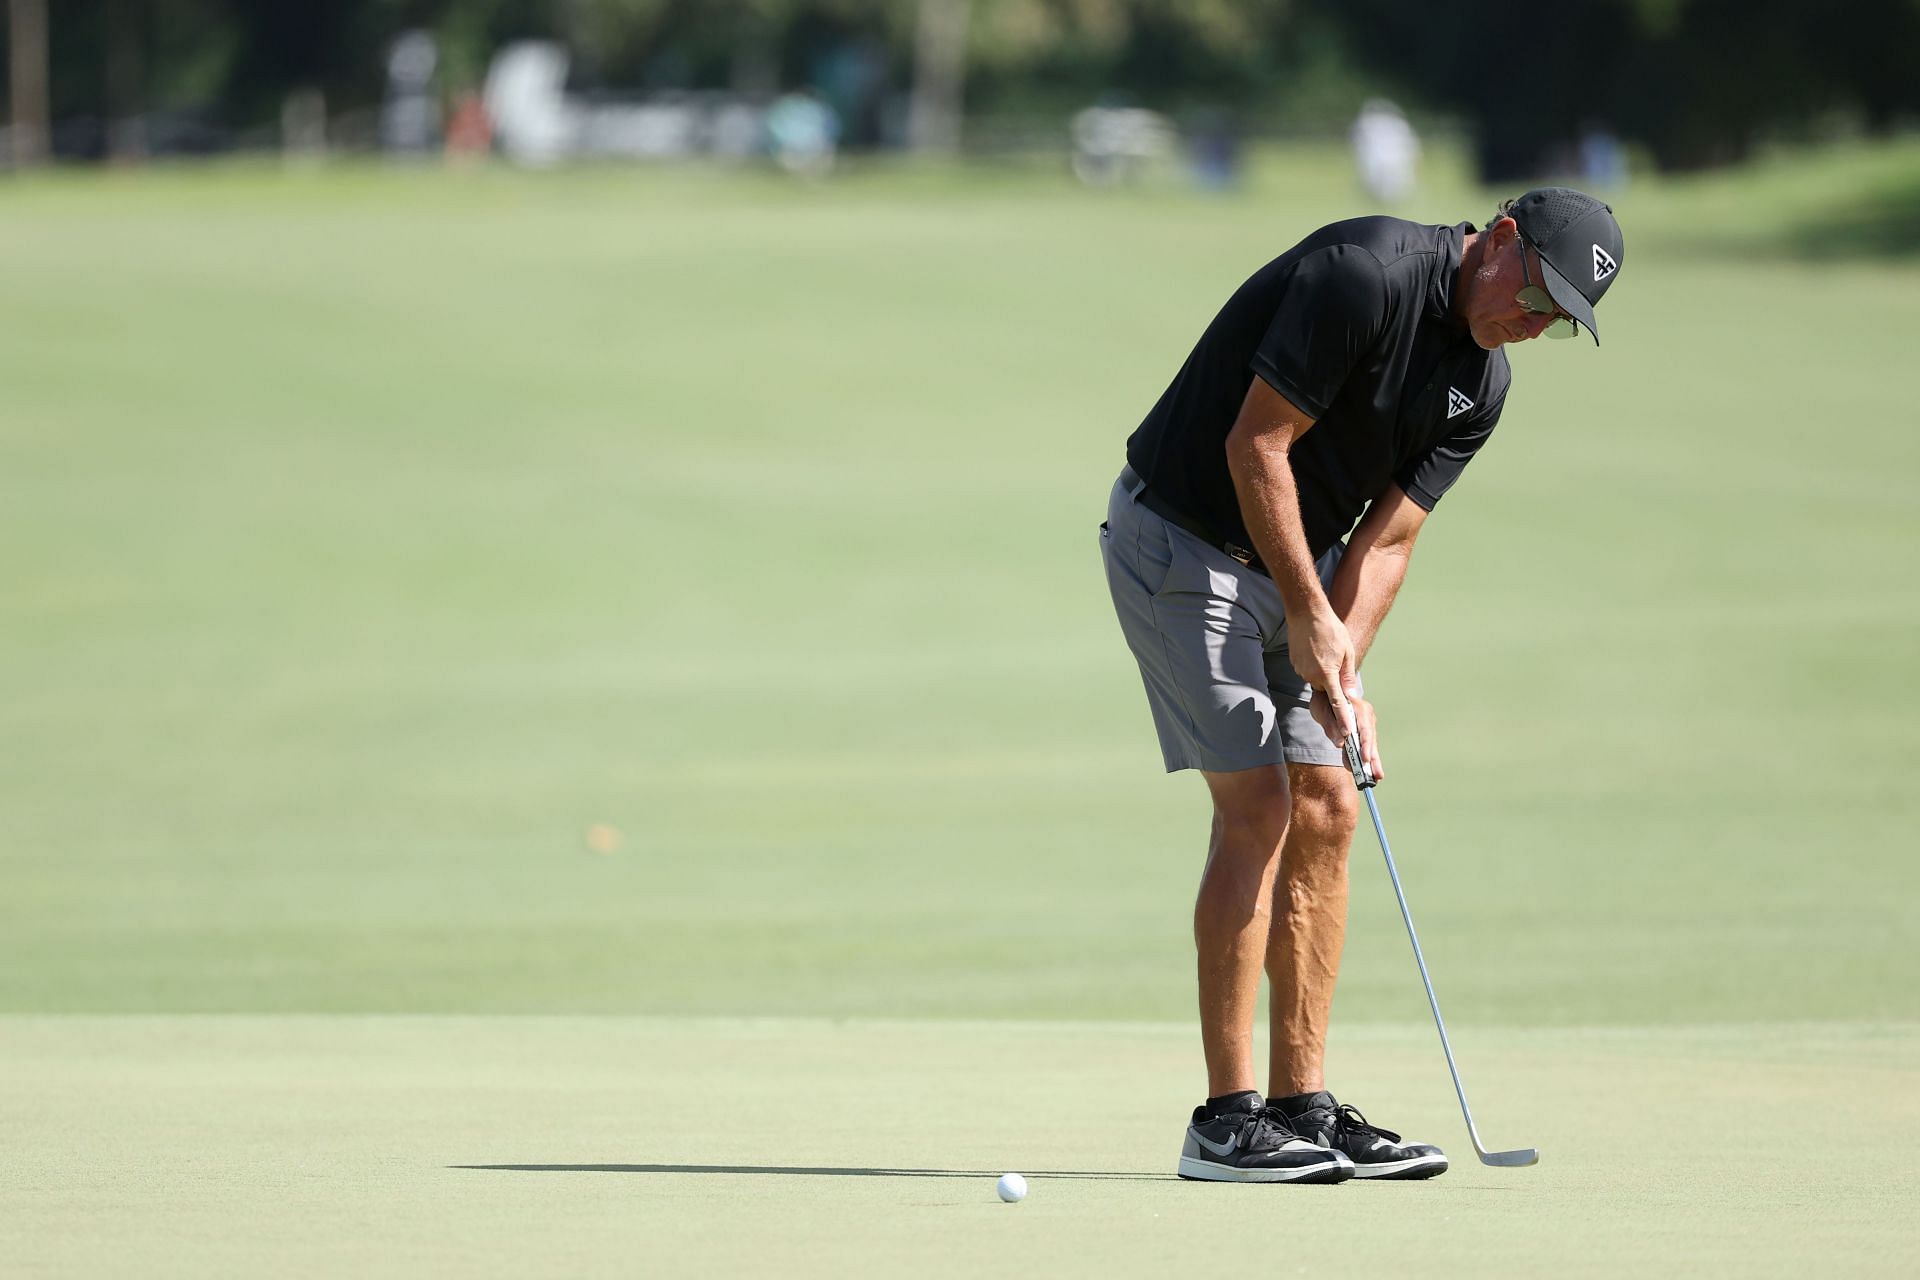 Phil Mickelson has arguably earned his money